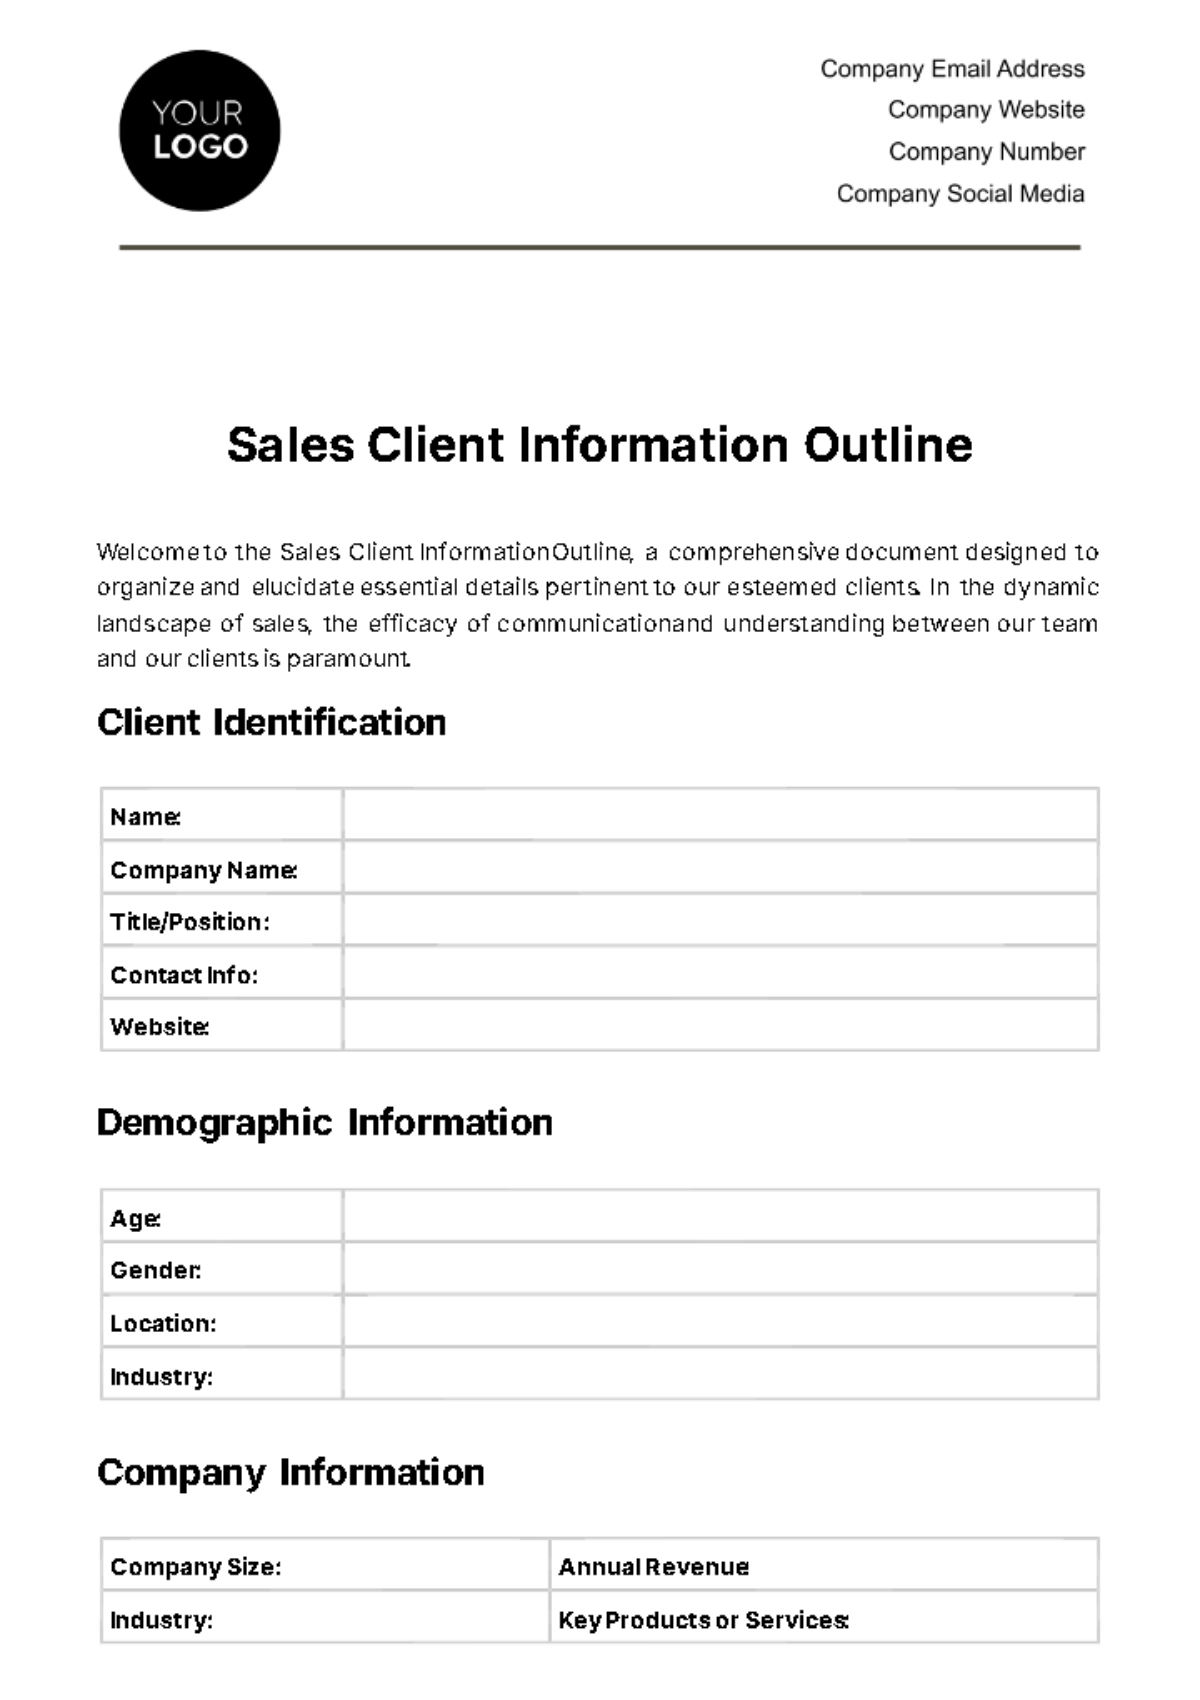 Free Sales Client Information Outline Template